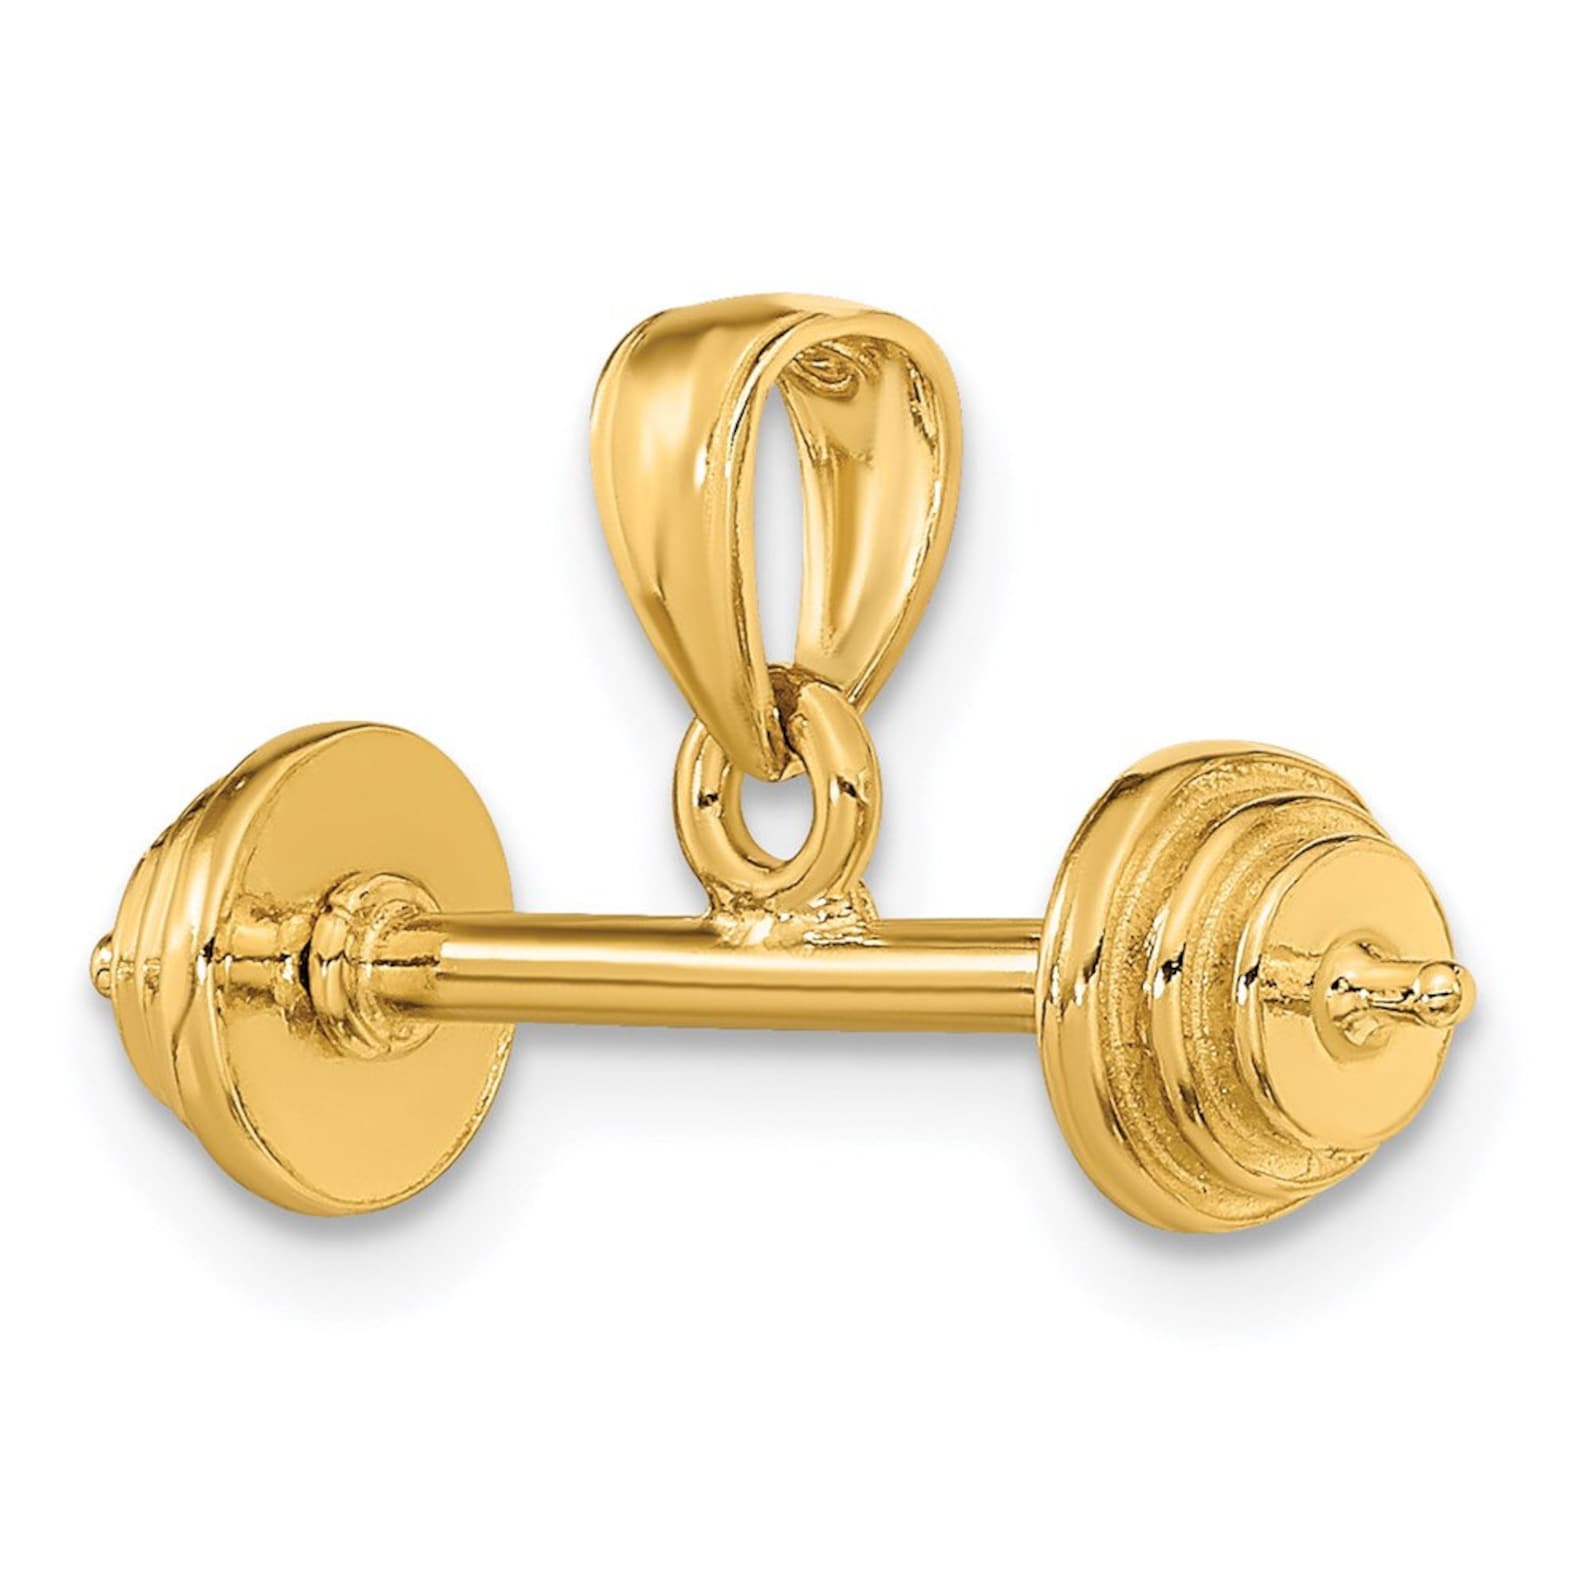 Gold 3D Barbell Pendant - Charlie & Co. Jewelry